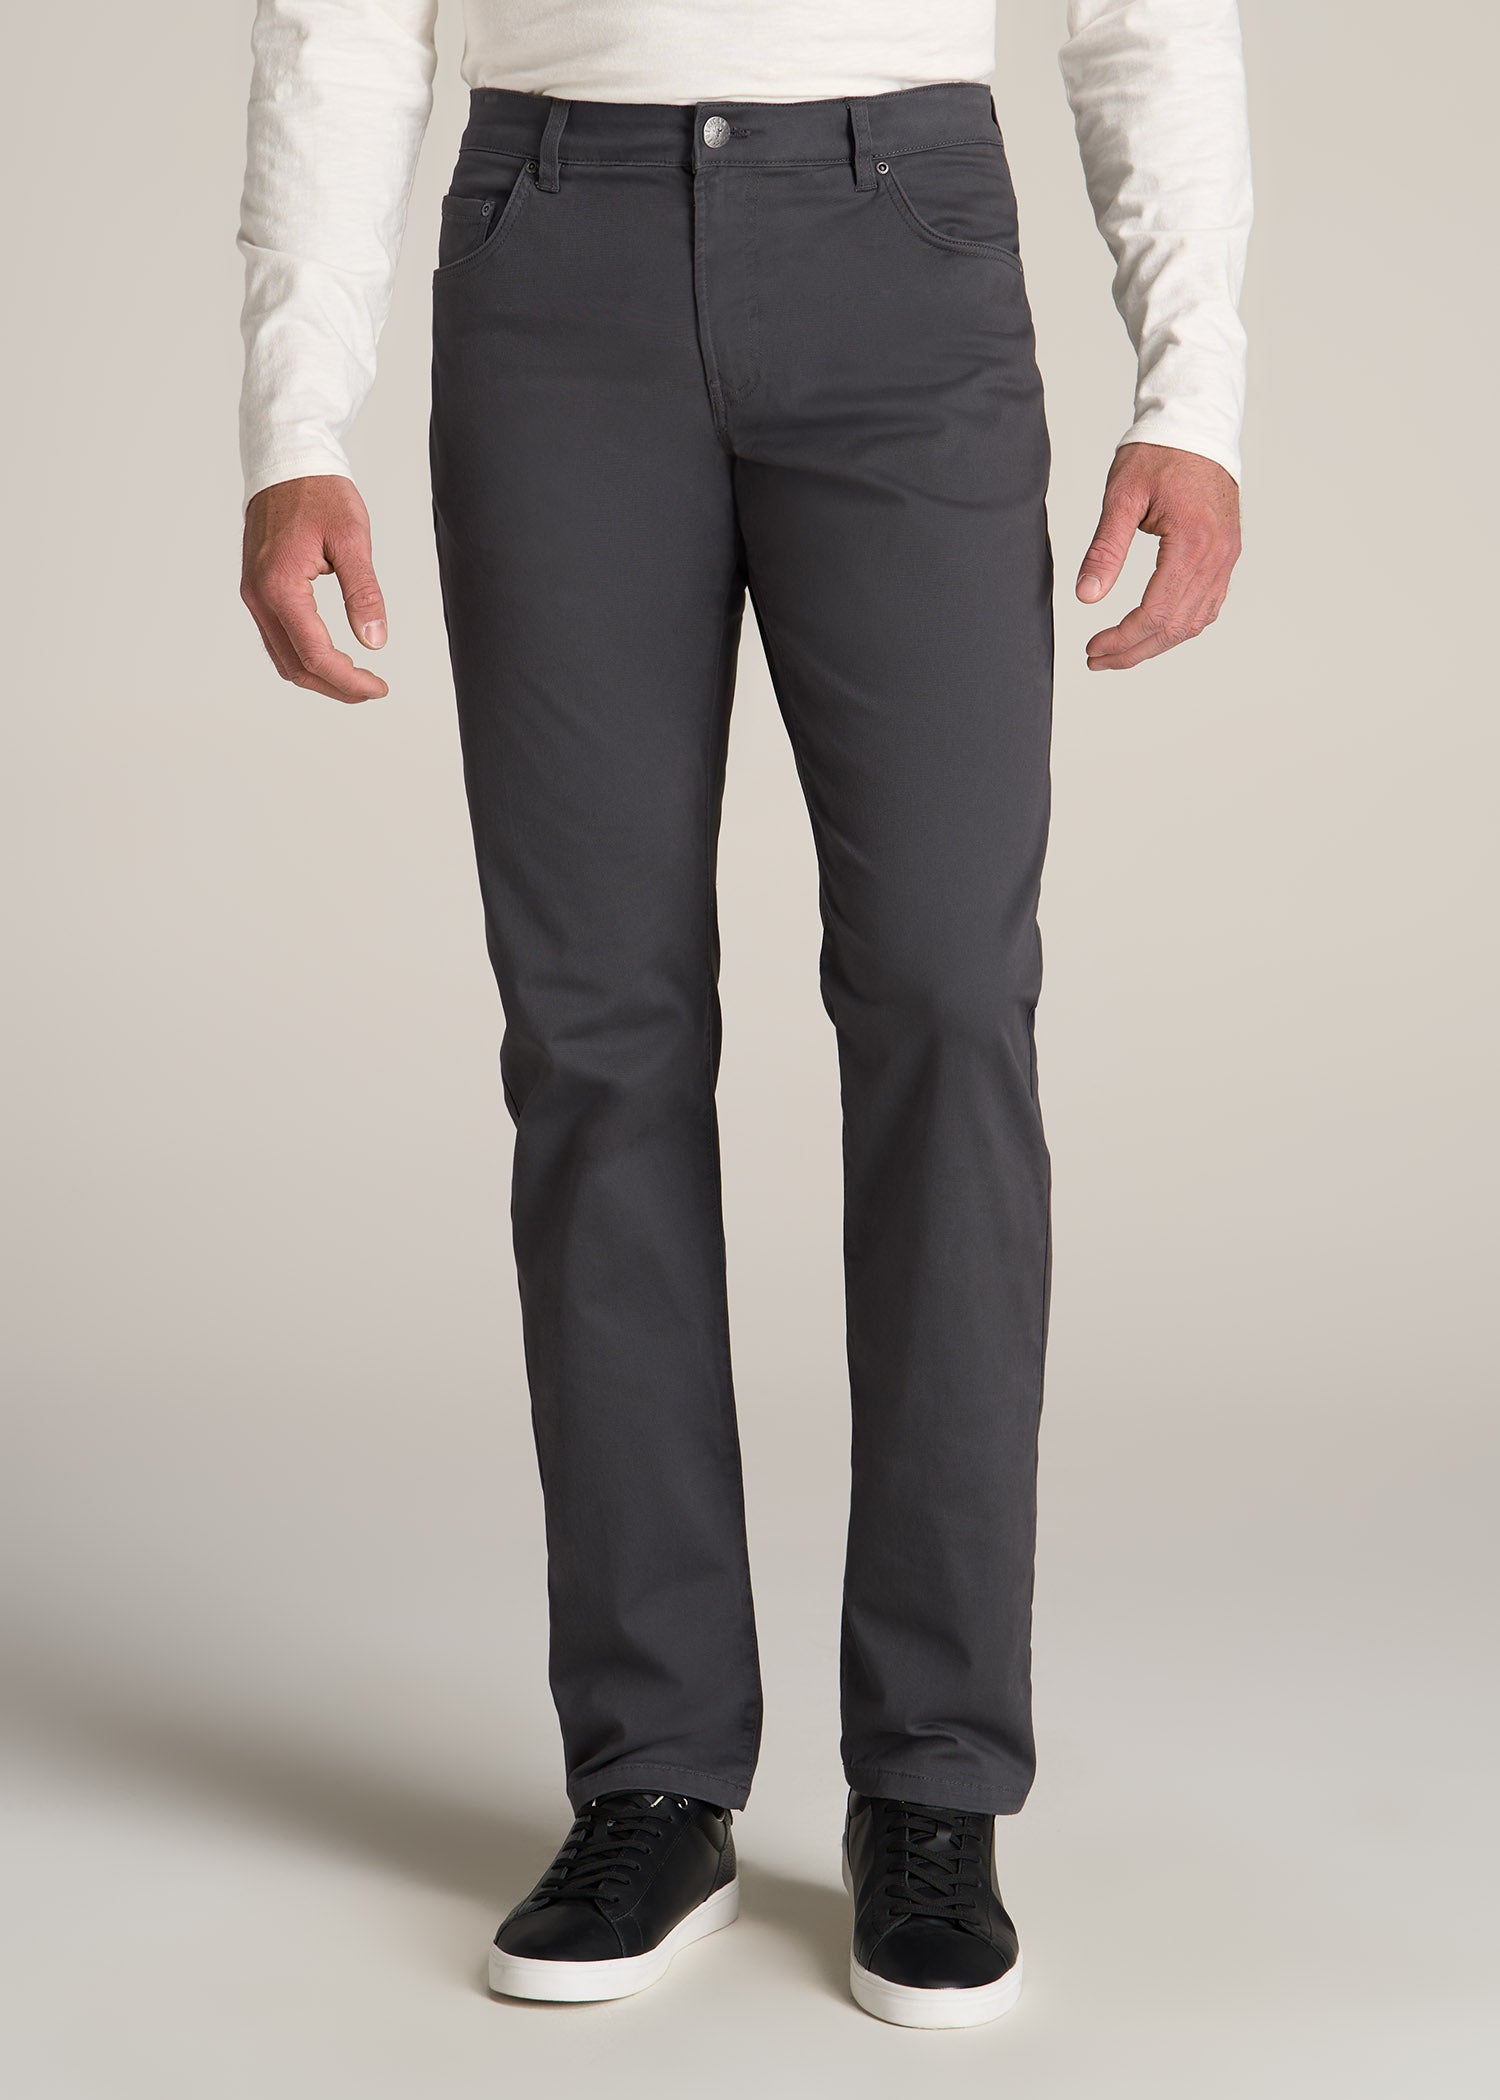 American-Tall-Men-J1-Straight-Fit-Five-Pocket-Pants-Iron-Grey-Front